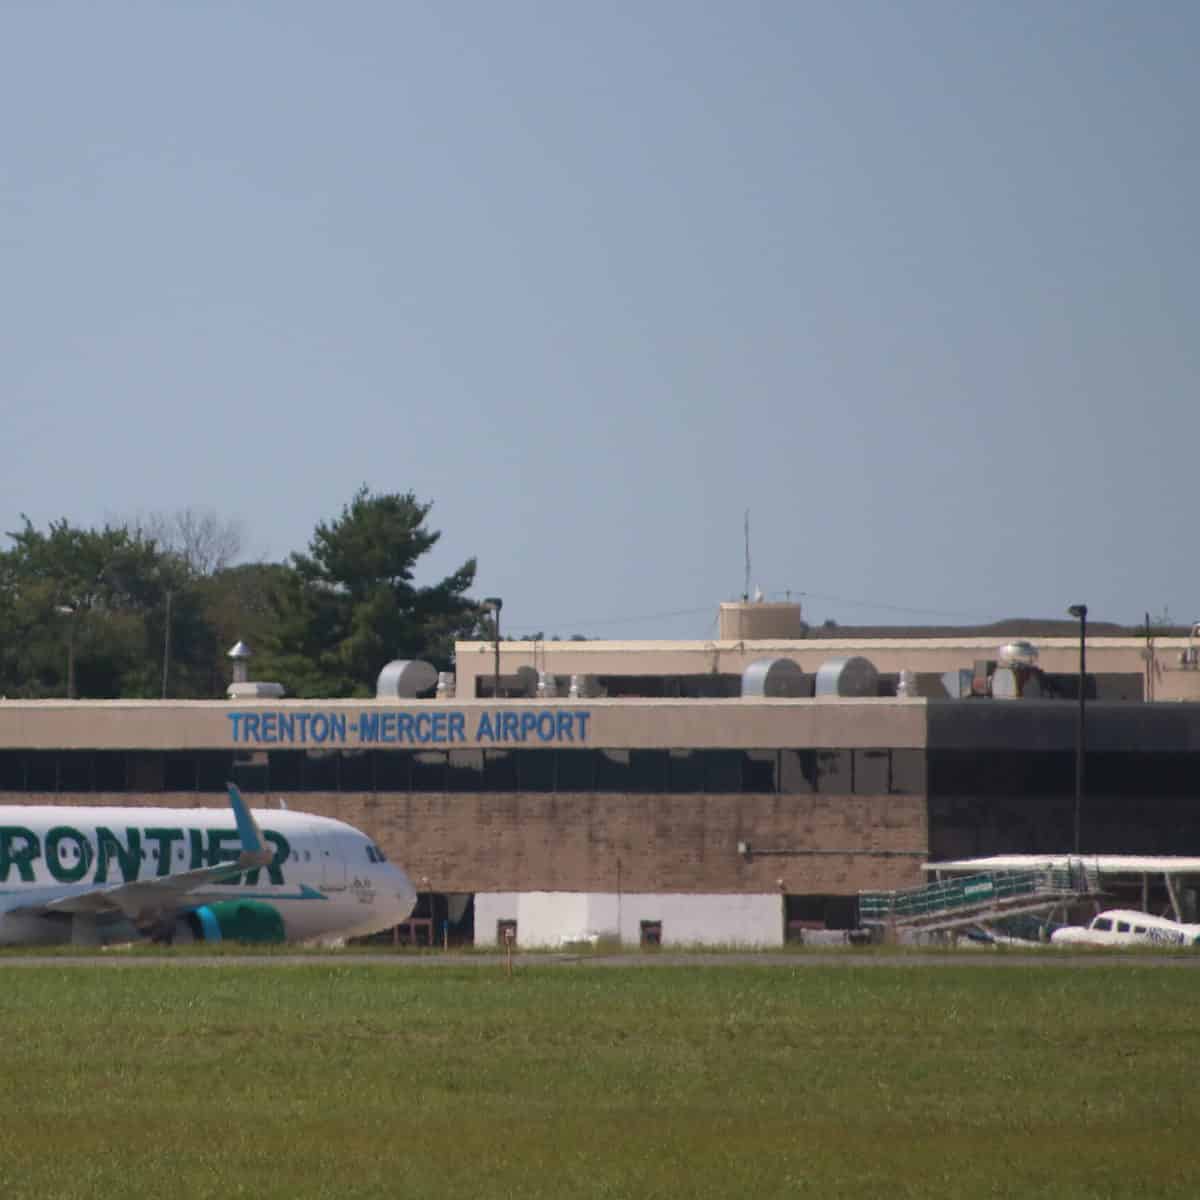 Frontier Airlines Marks 10 Years of service from Trenton-Mercer Airport